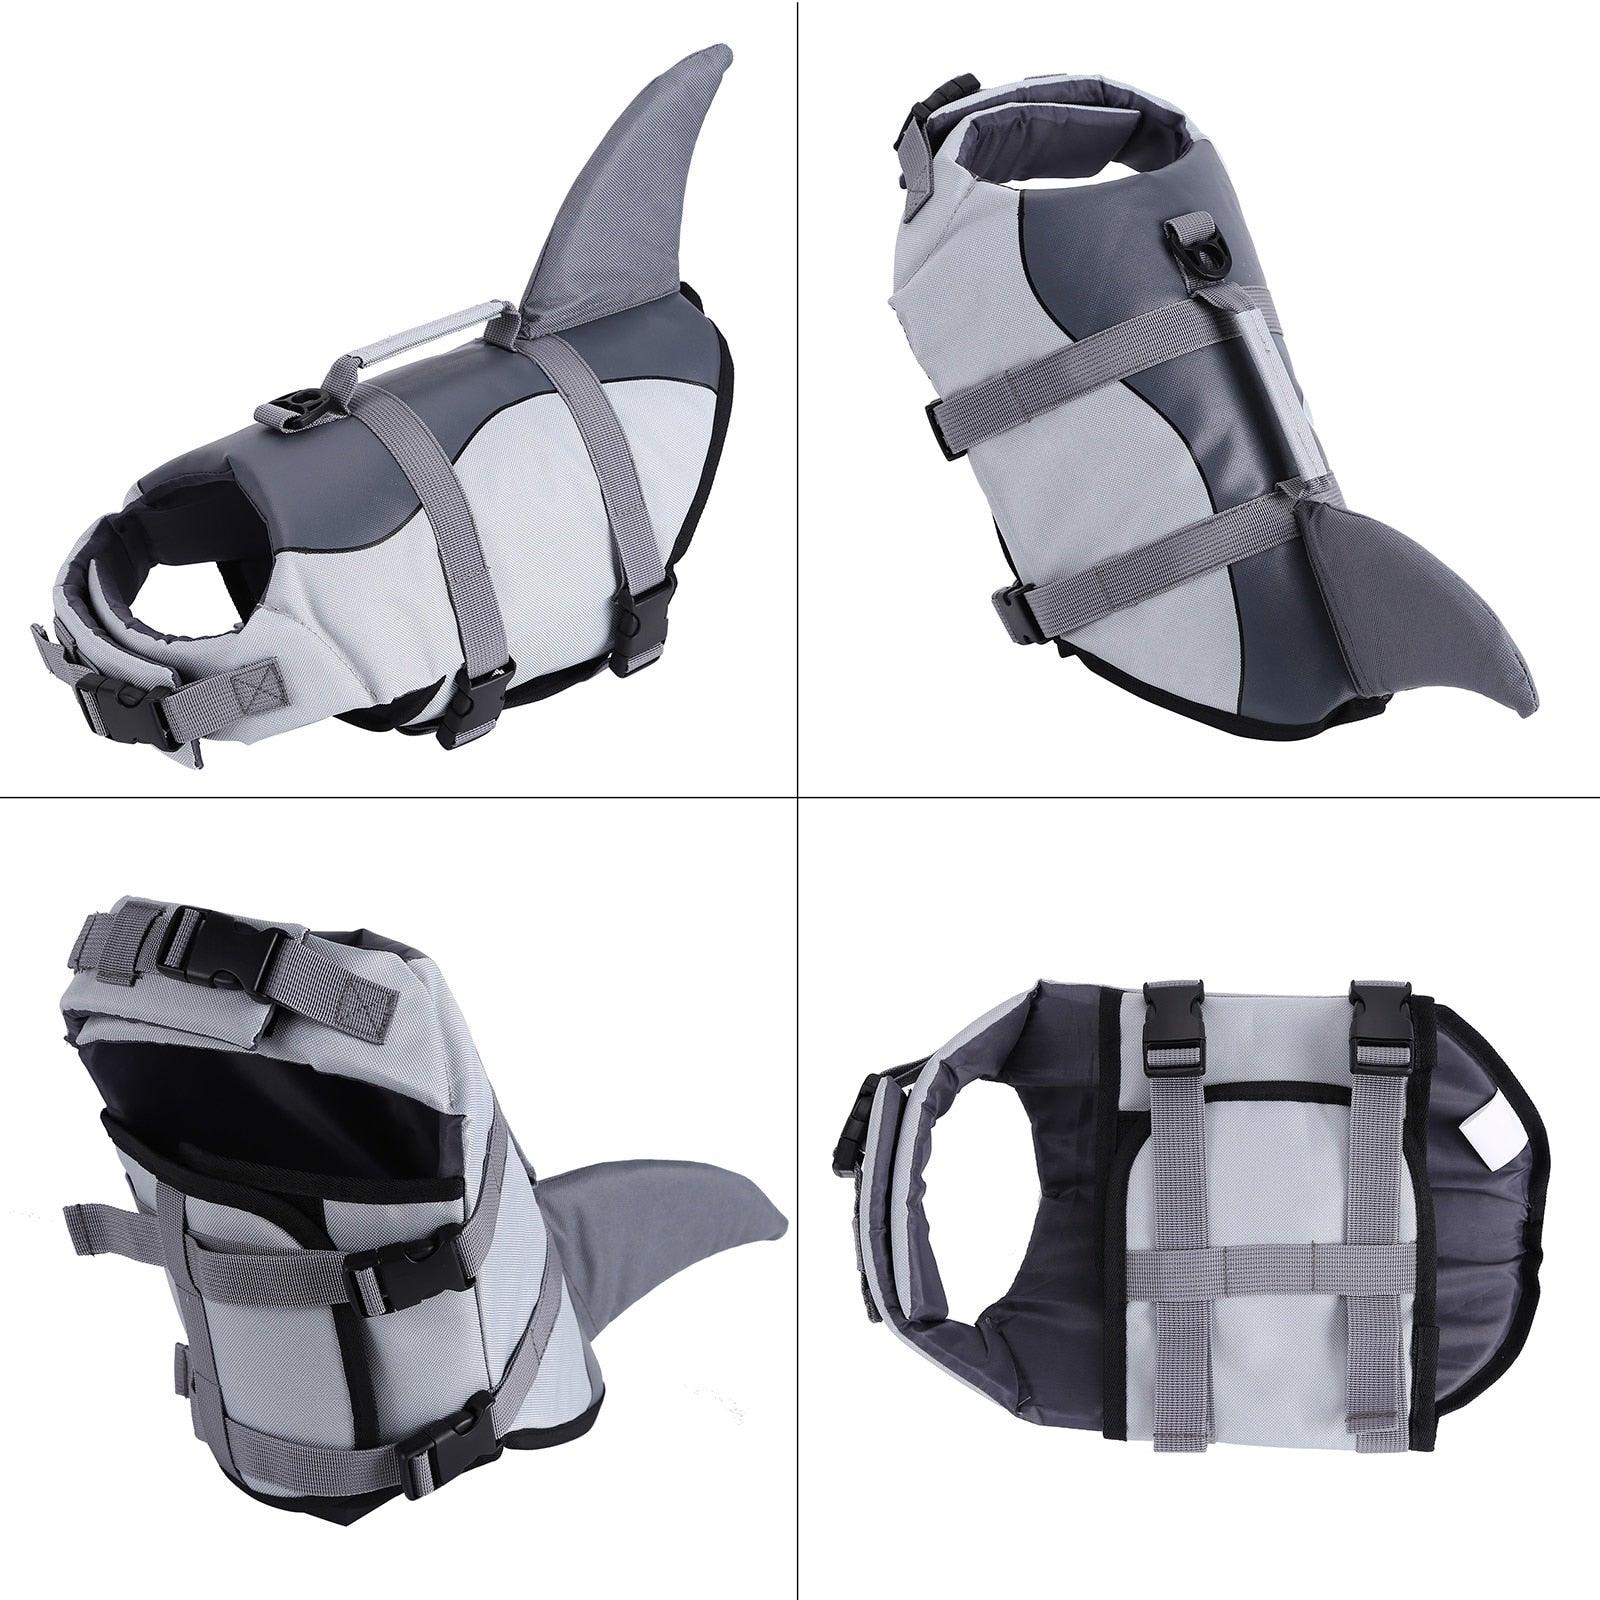 Shark Life Vest for Dogs from different angles